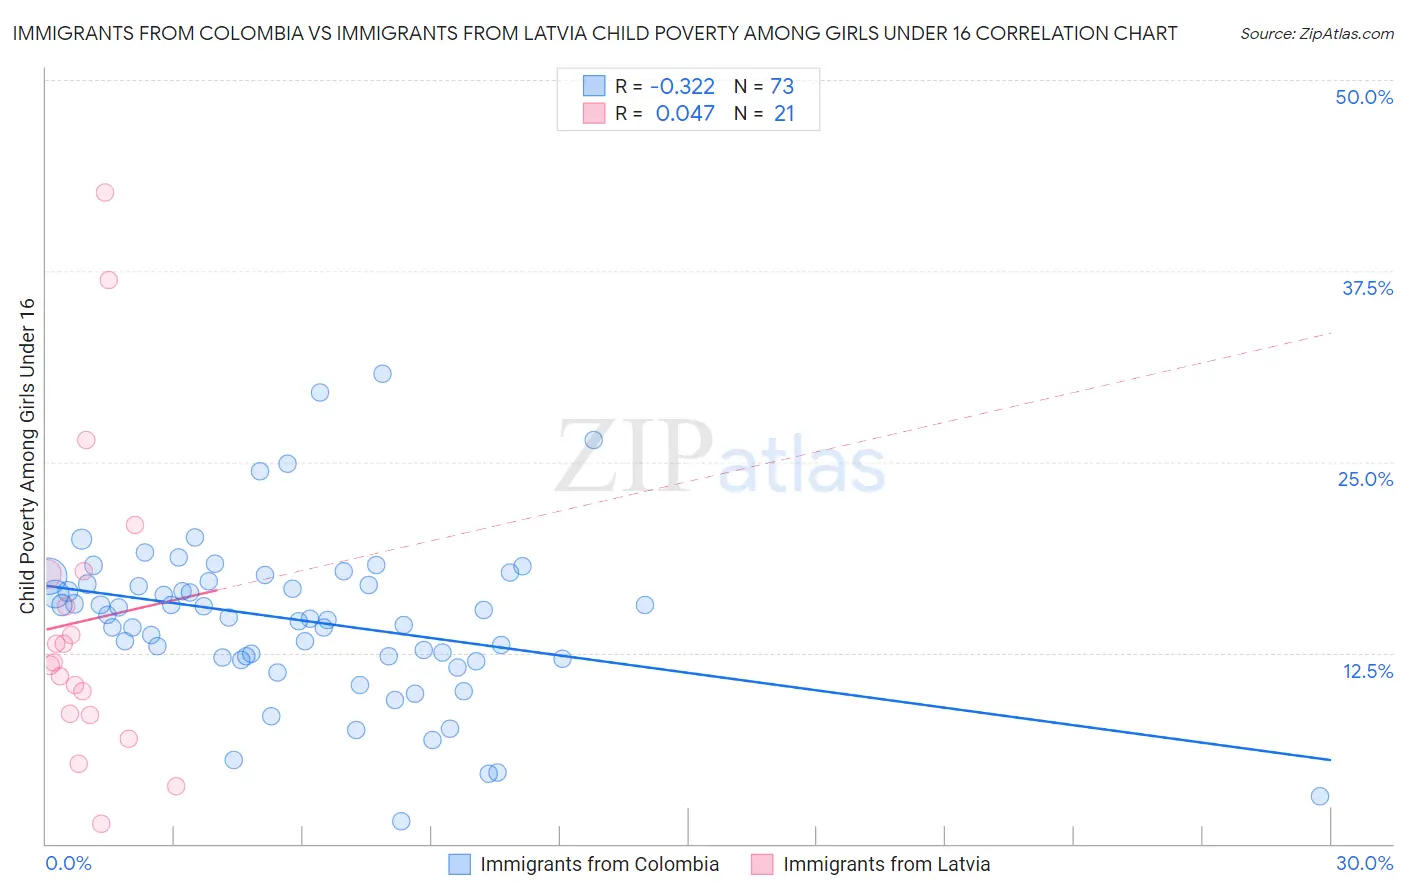 Immigrants from Colombia vs Immigrants from Latvia Child Poverty Among Girls Under 16